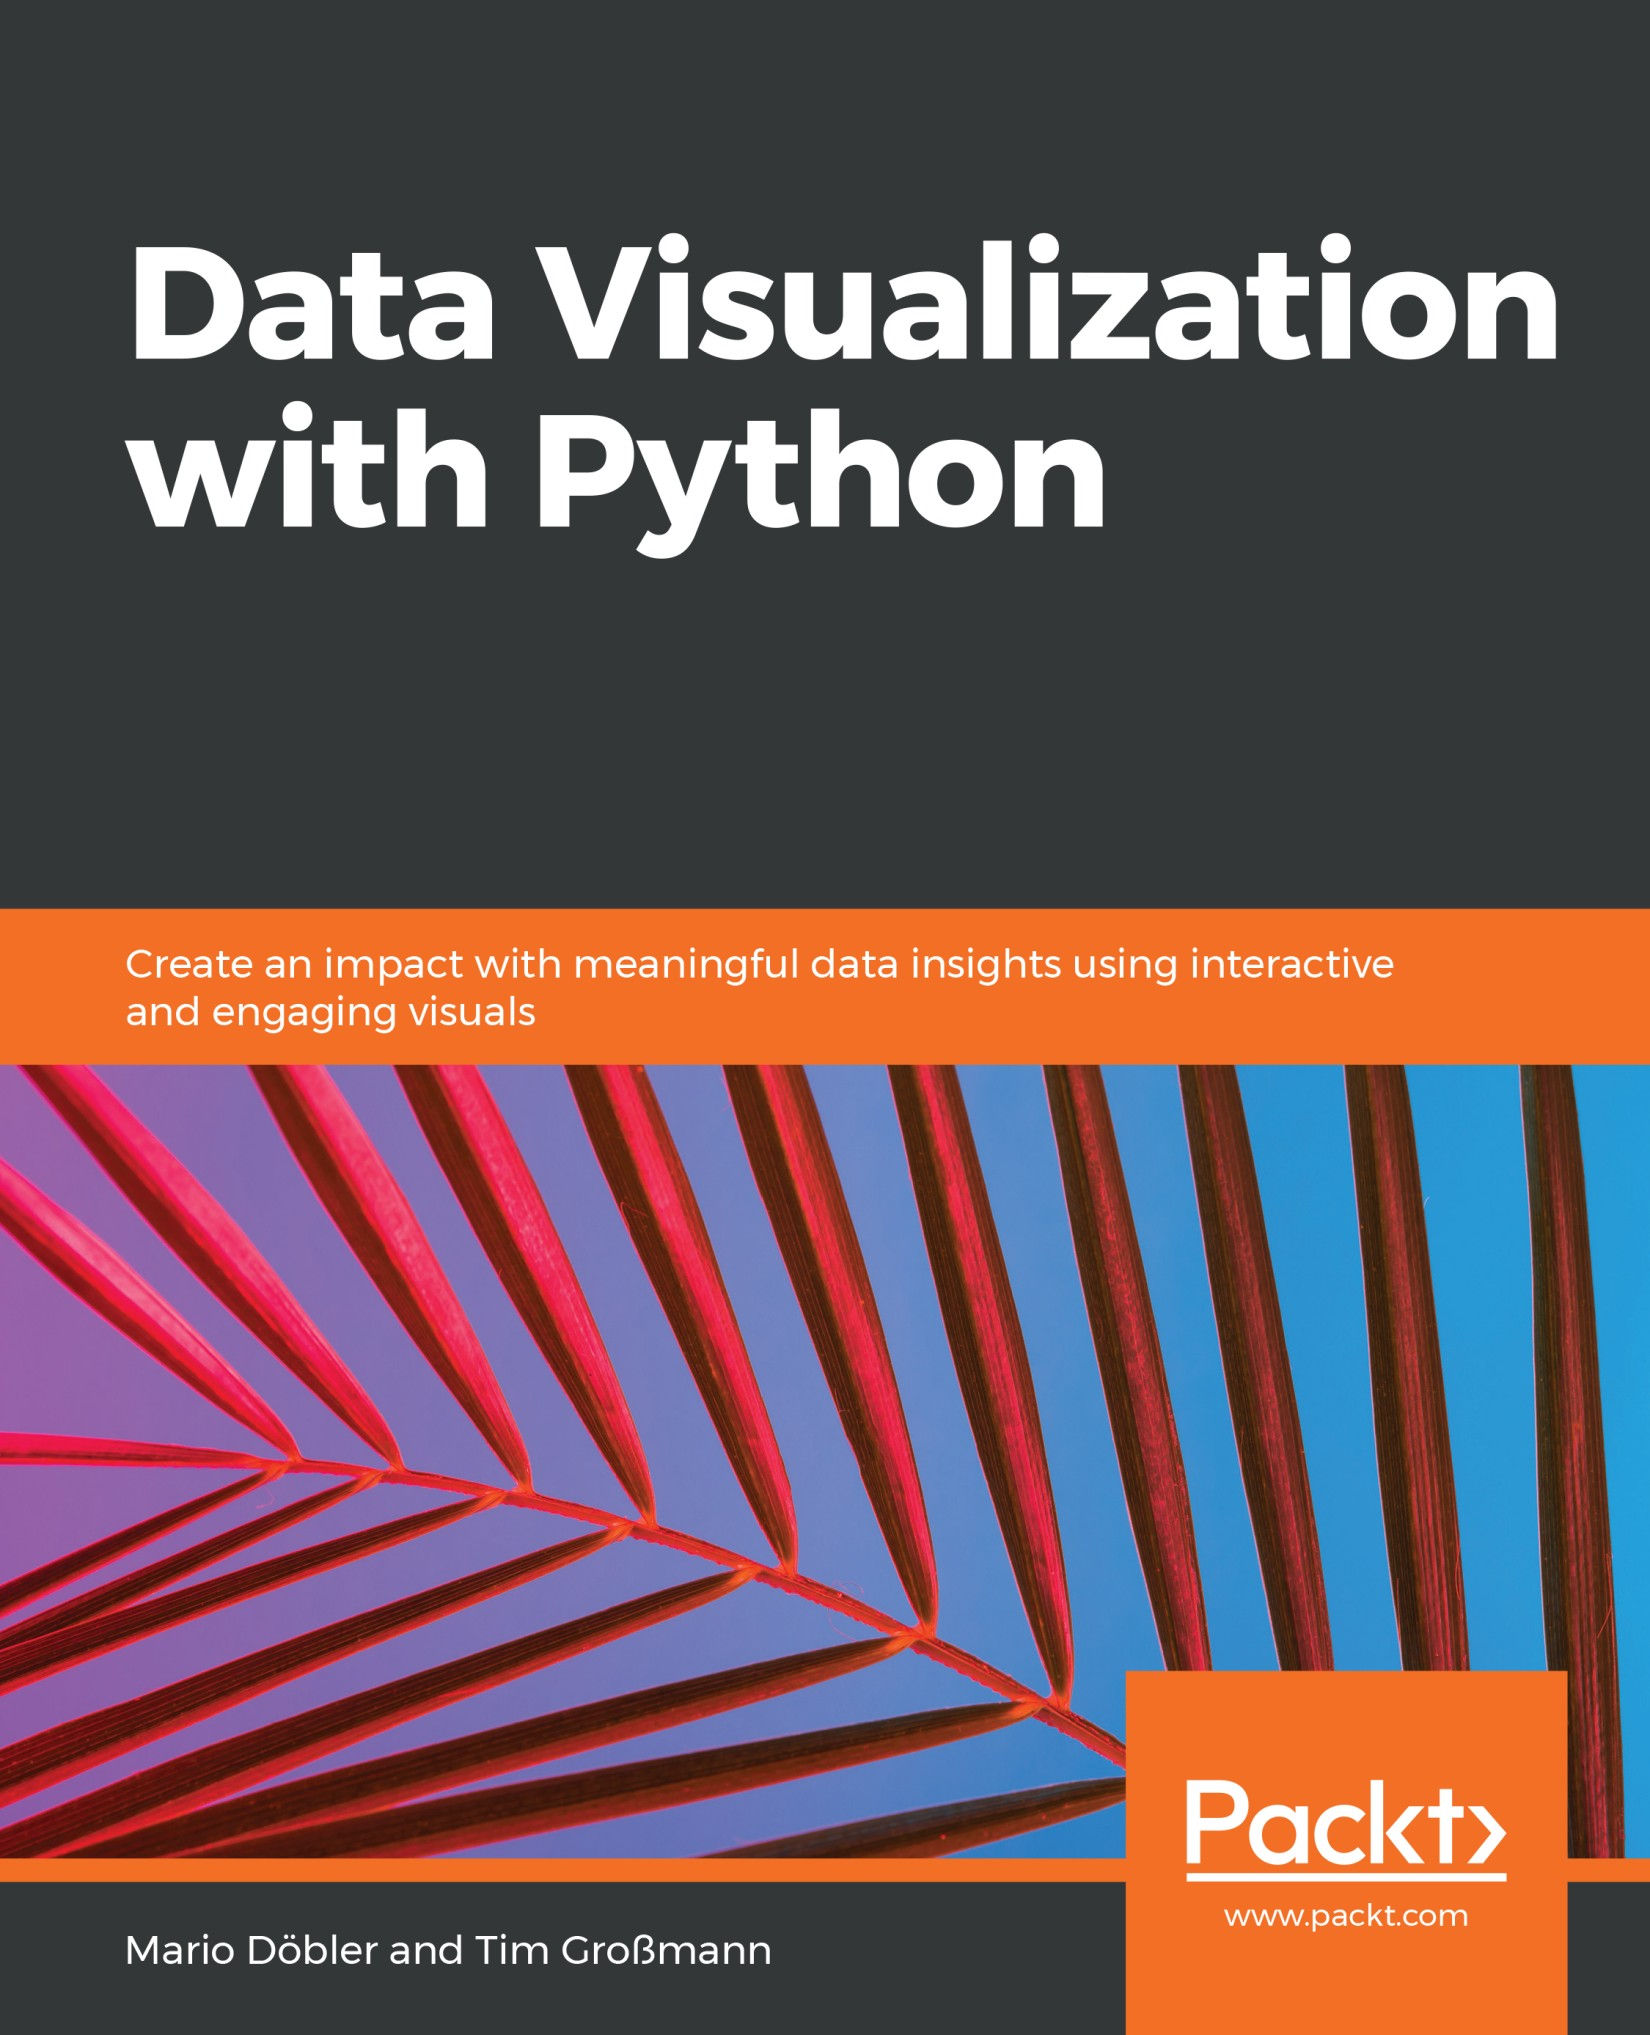 Data Visualization With Python: Create an Impact With Meaningful Data Insights Using Interactive and Engaging Visuals